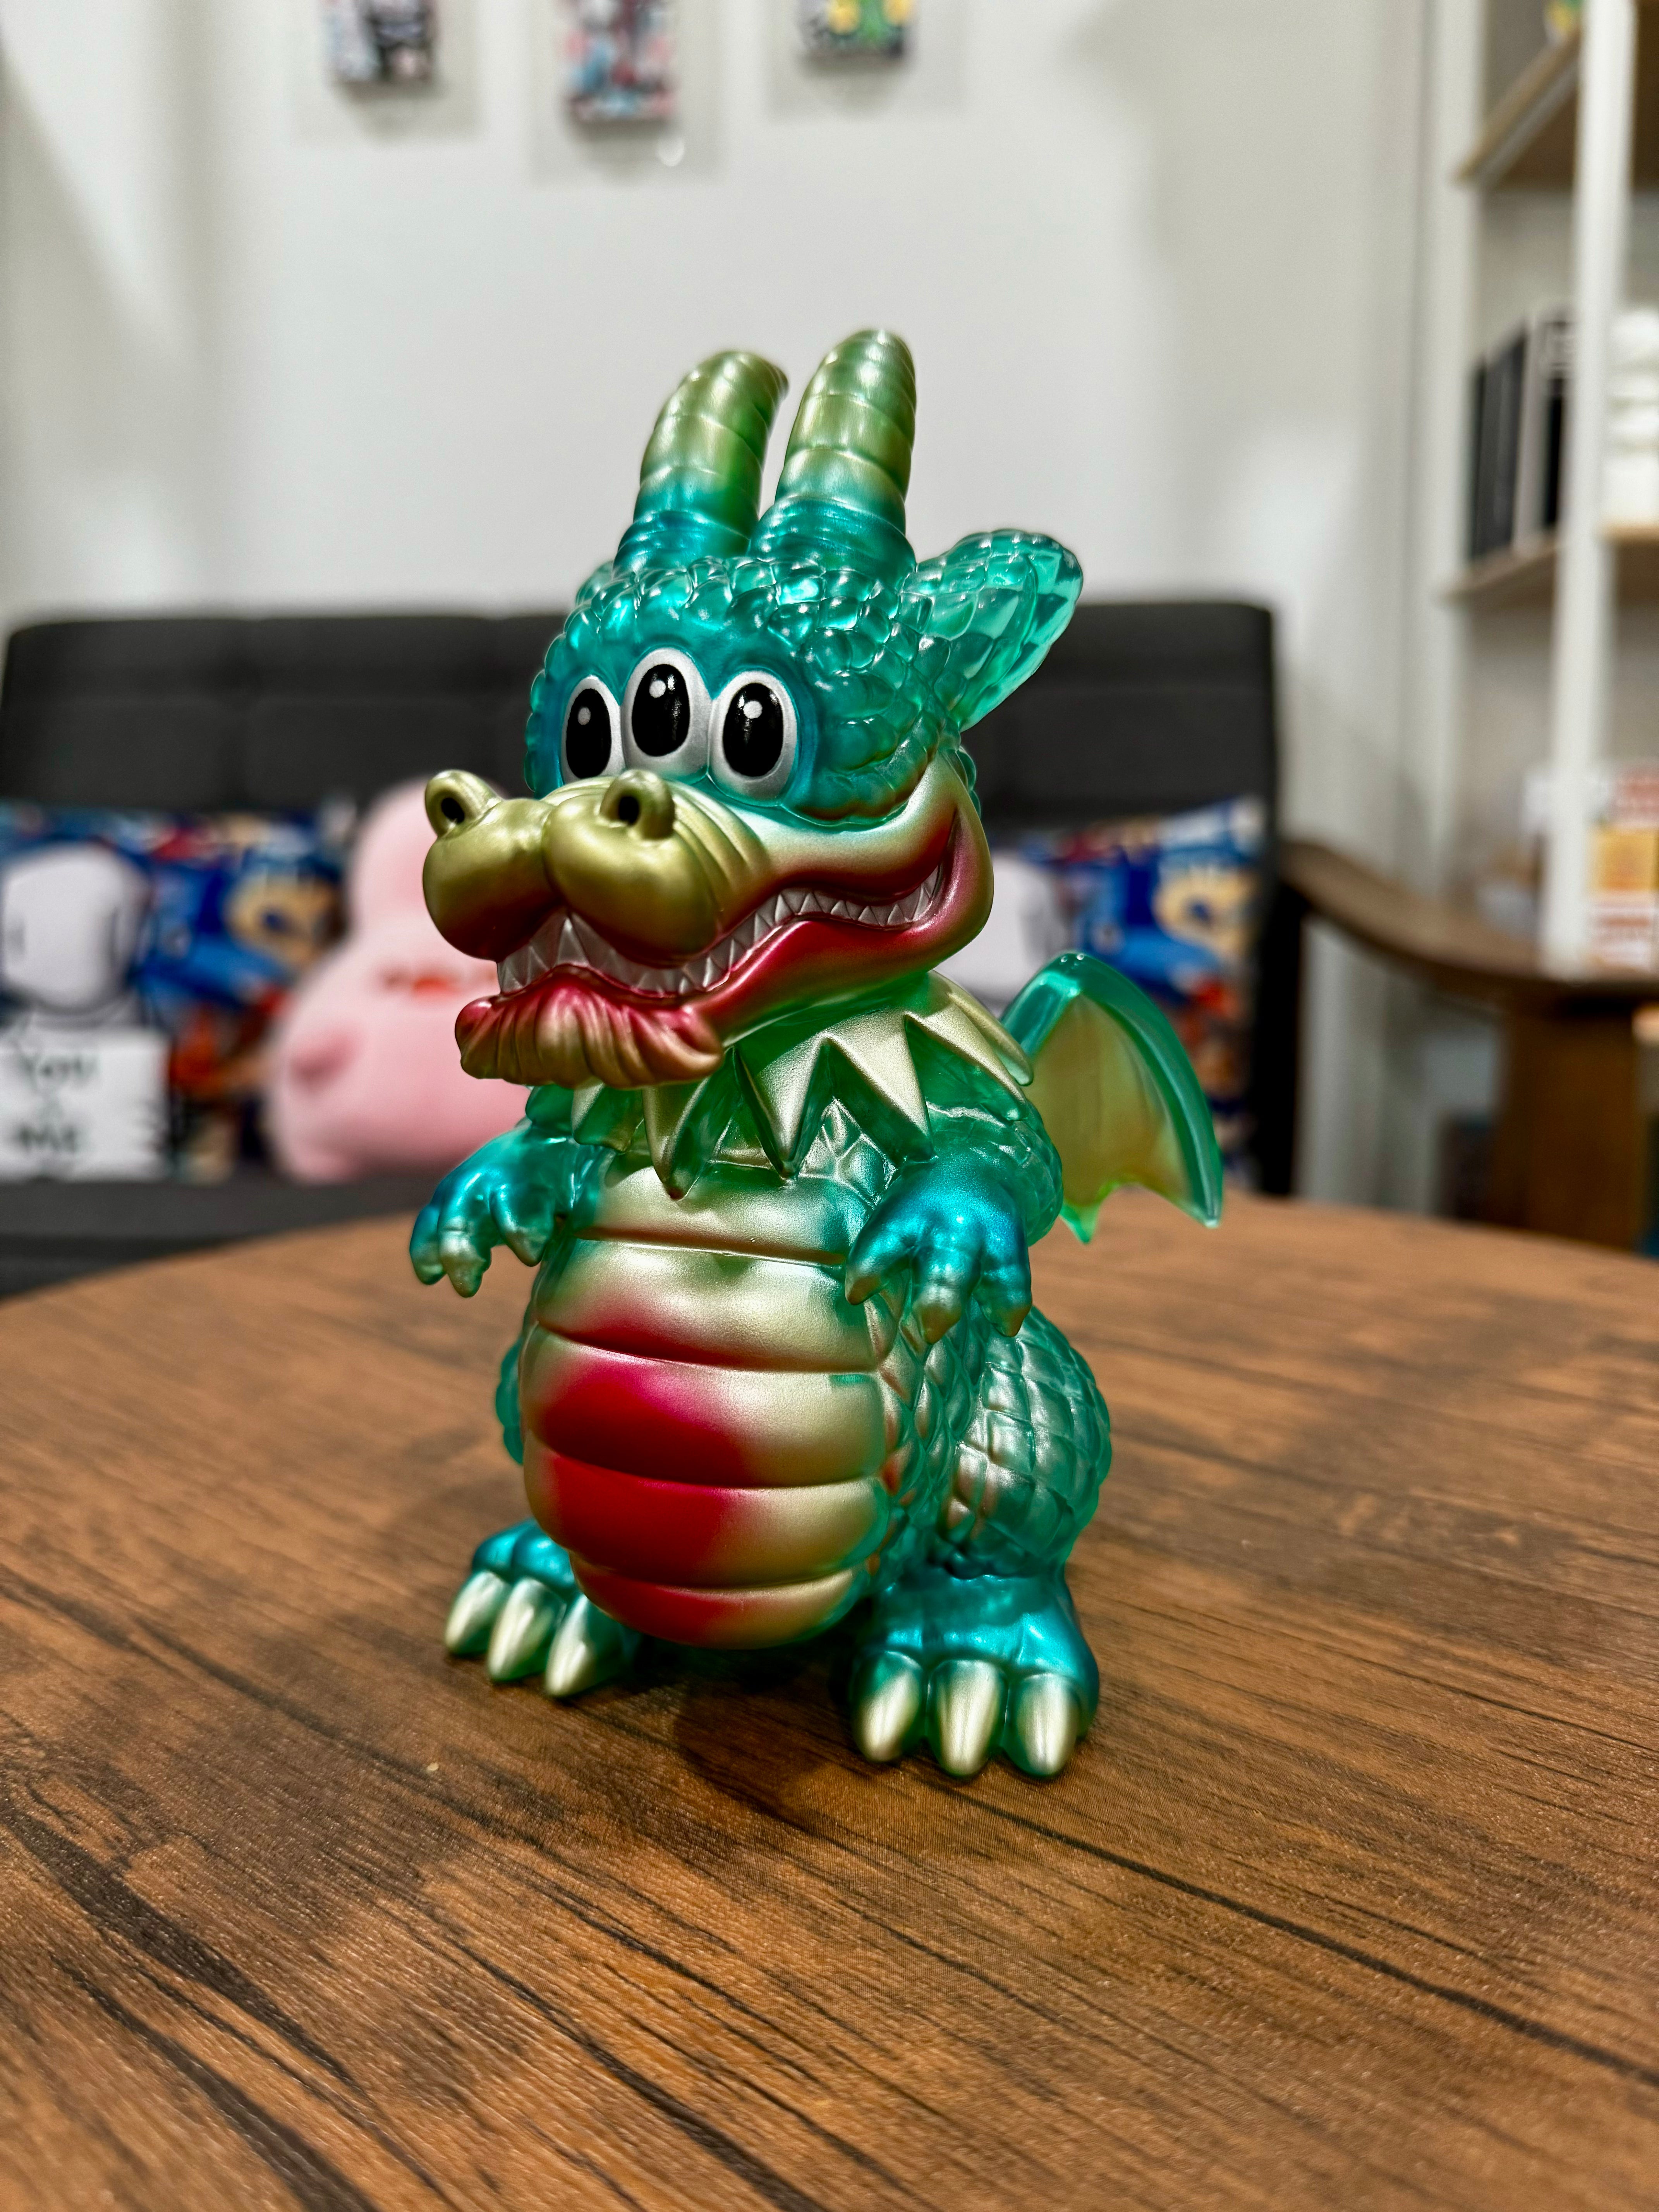 A serene Sofubi dragon figurine titled Calm Dragon Clear Mint by Art Junkie from Strangecat Toys. Toy features intricate details and a peaceful expression.